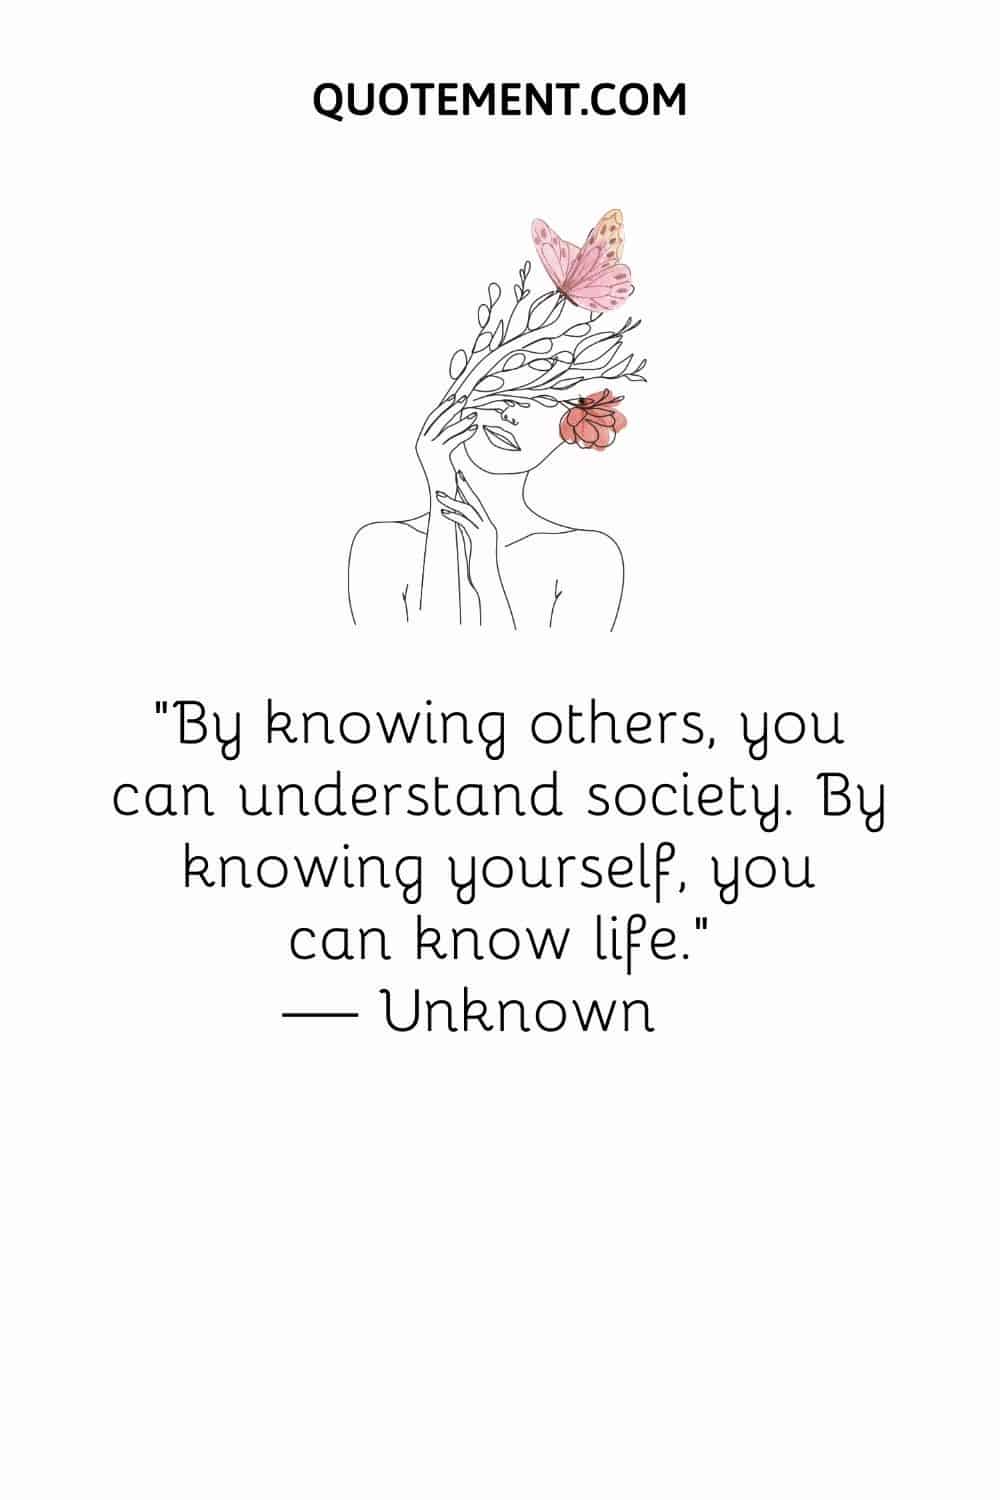 By knowing others, you can understand society. By knowing yourself, you can know life